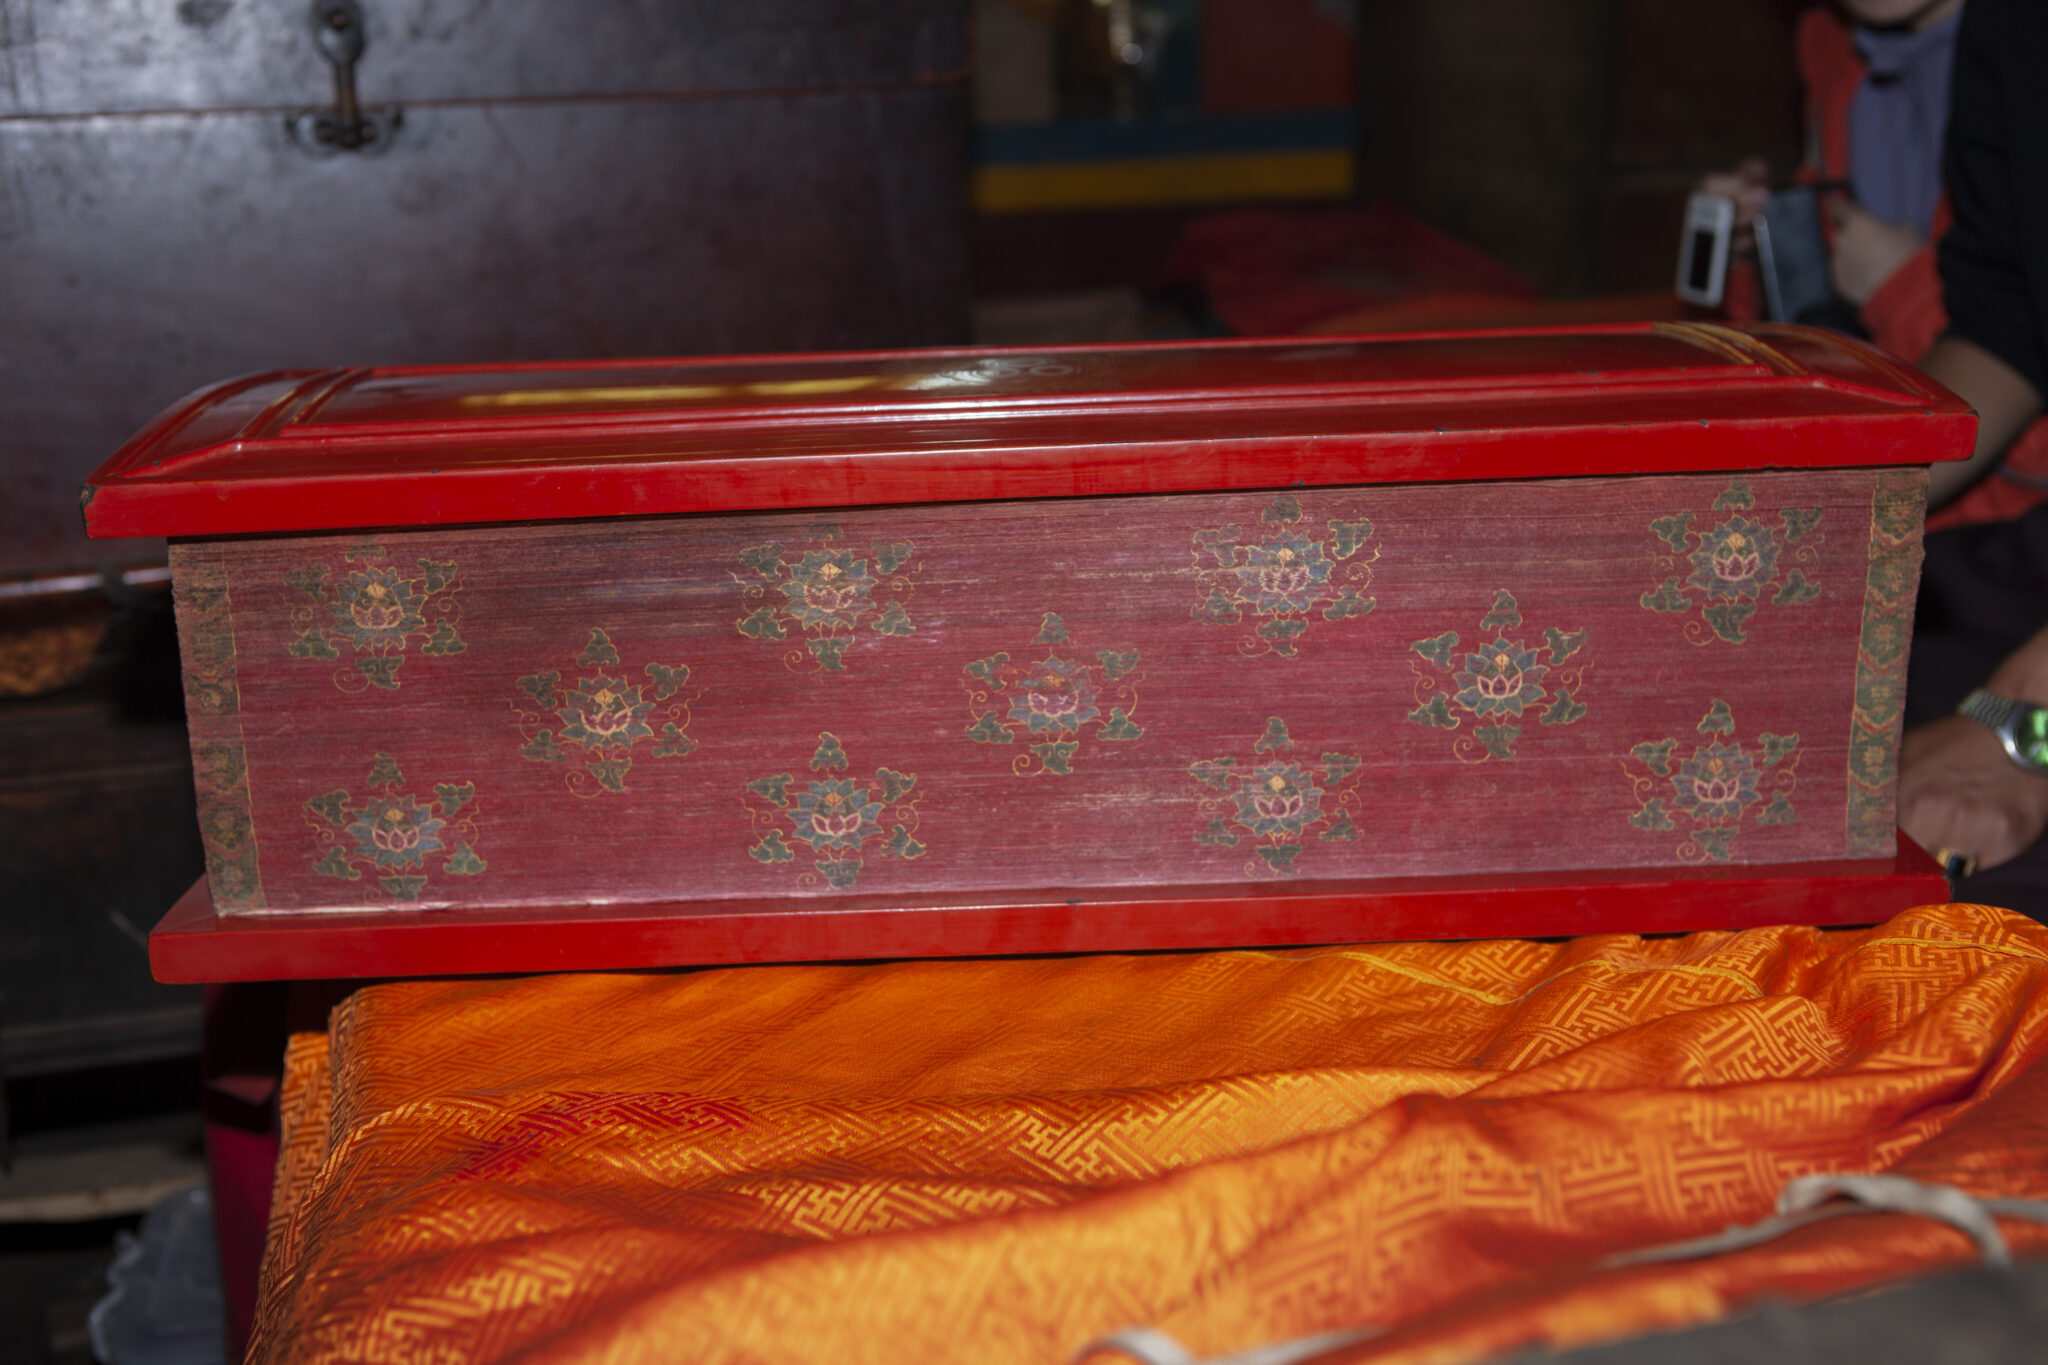 Rectangular wooden box, painted red with starburst pattern on side, rests on orange textile